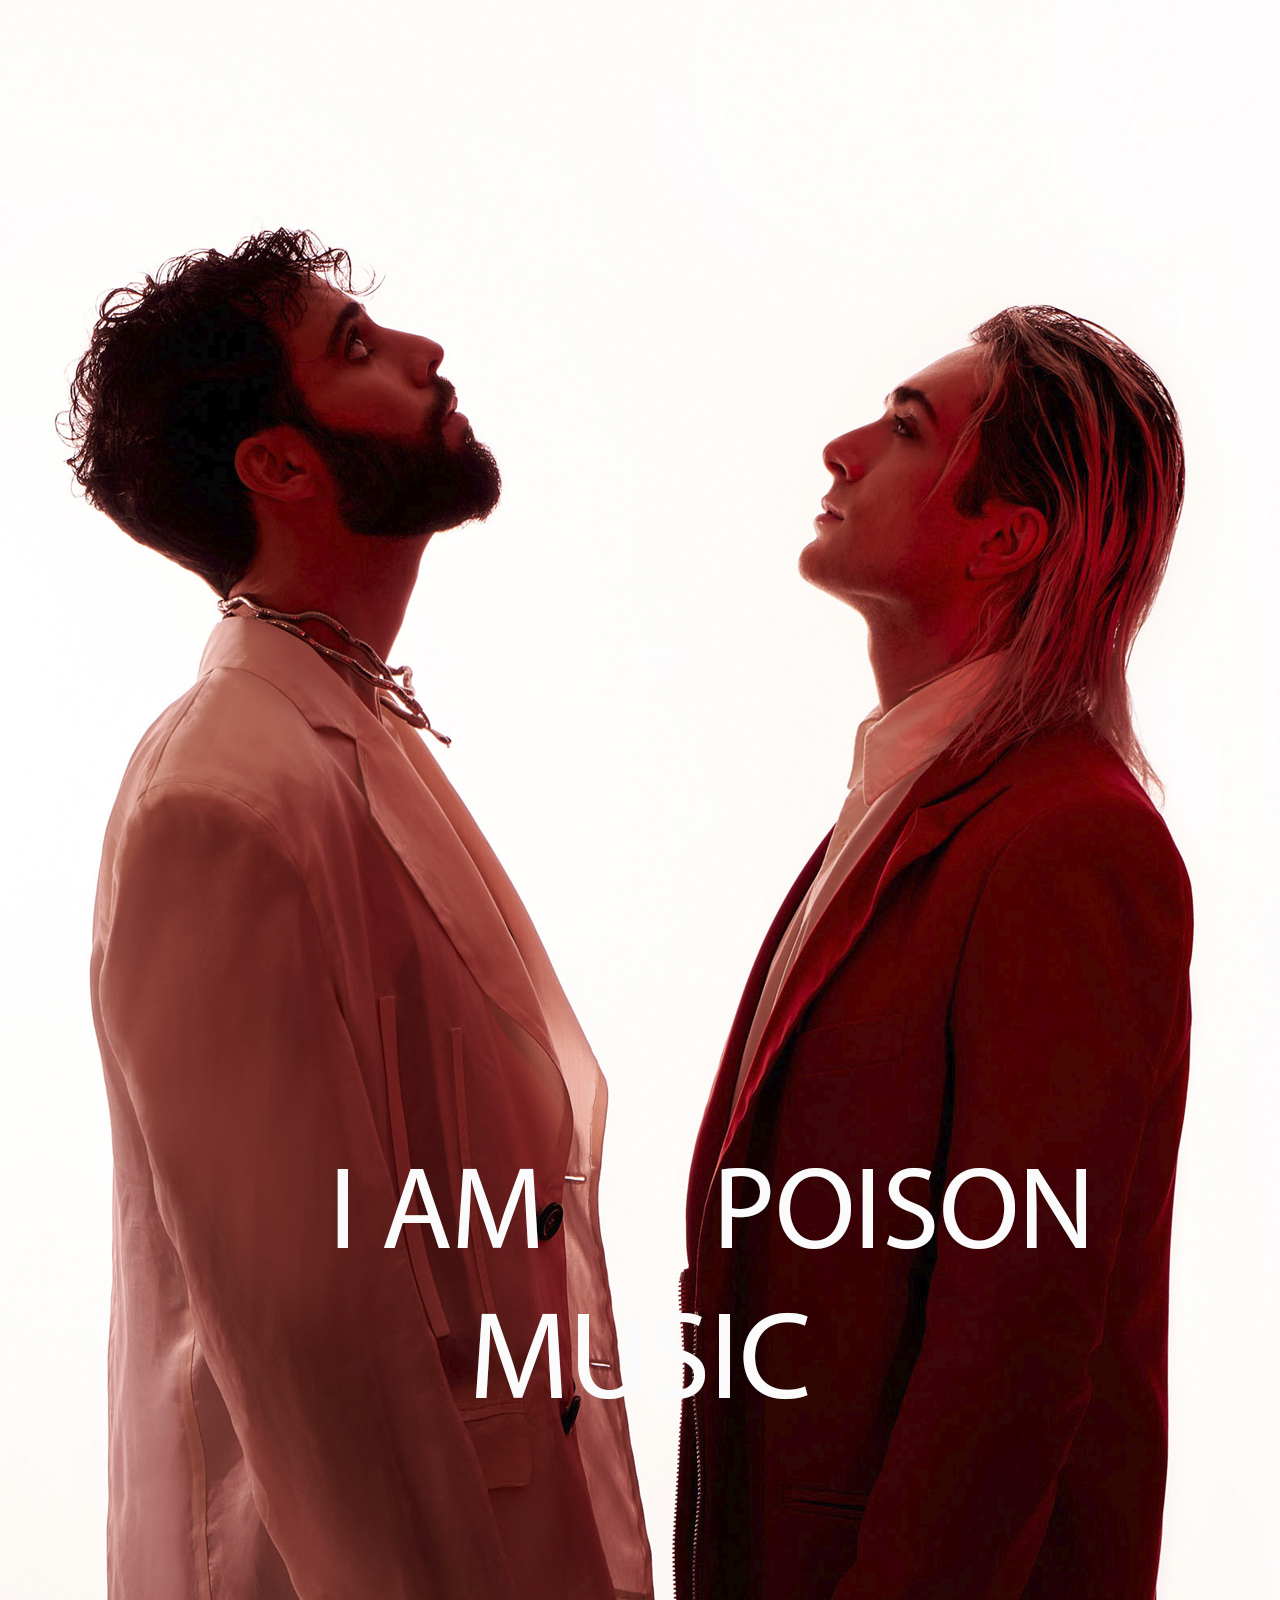 I AM POISON MUSIC by Andrea Reina